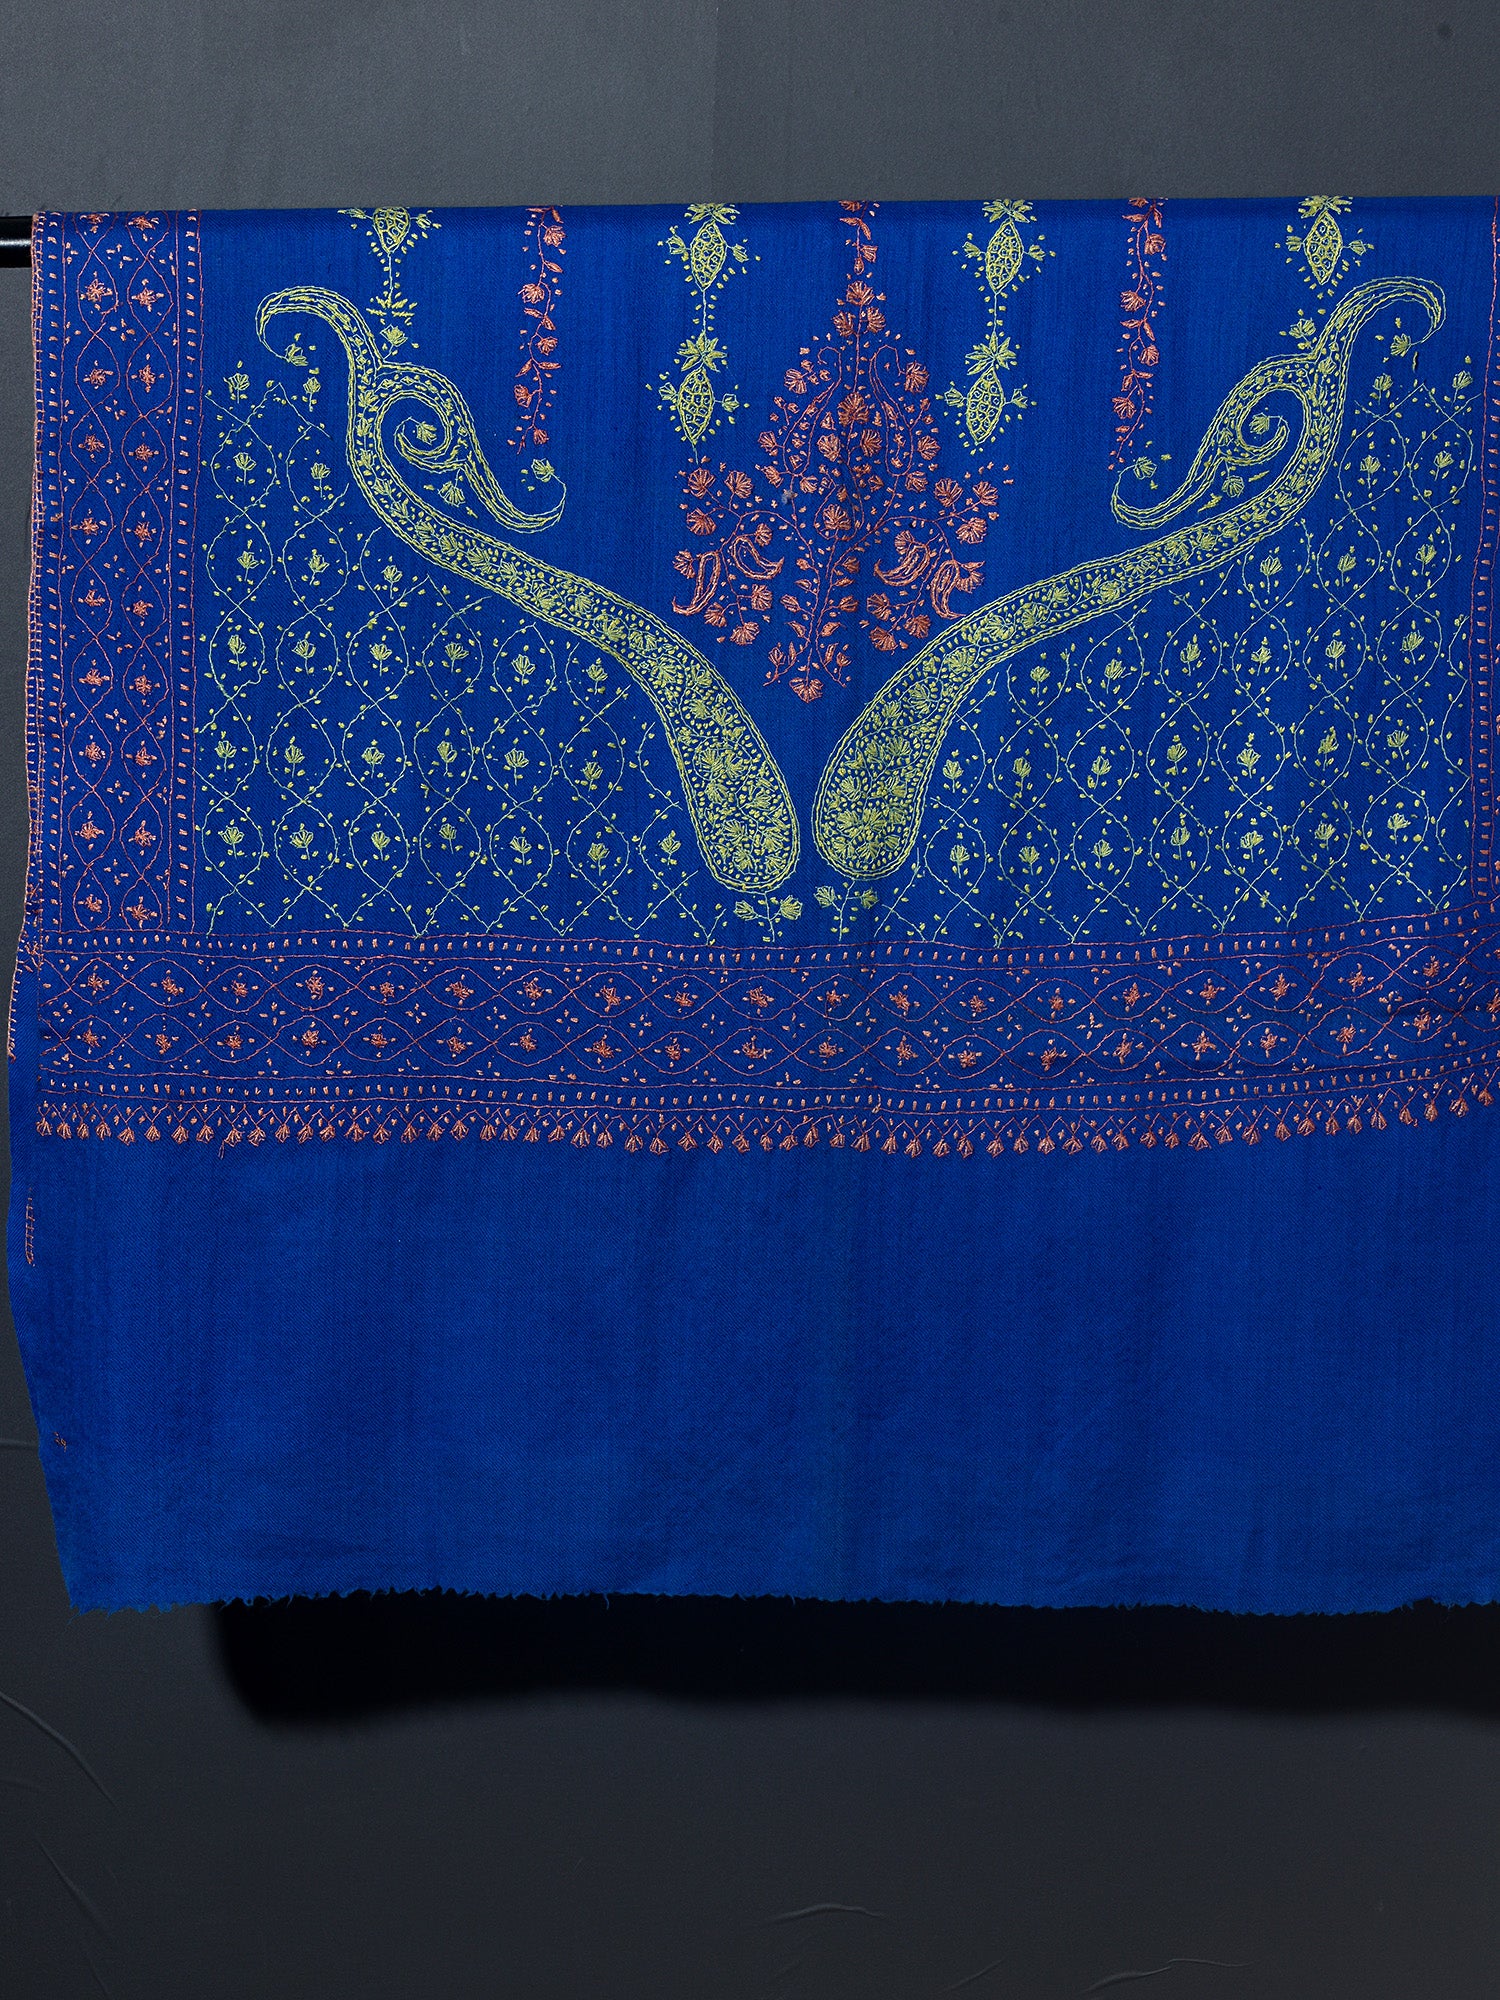 ORNAMENTAL PAISLEY The Magnificent Hand Embroidered Stole - Blissful Blue